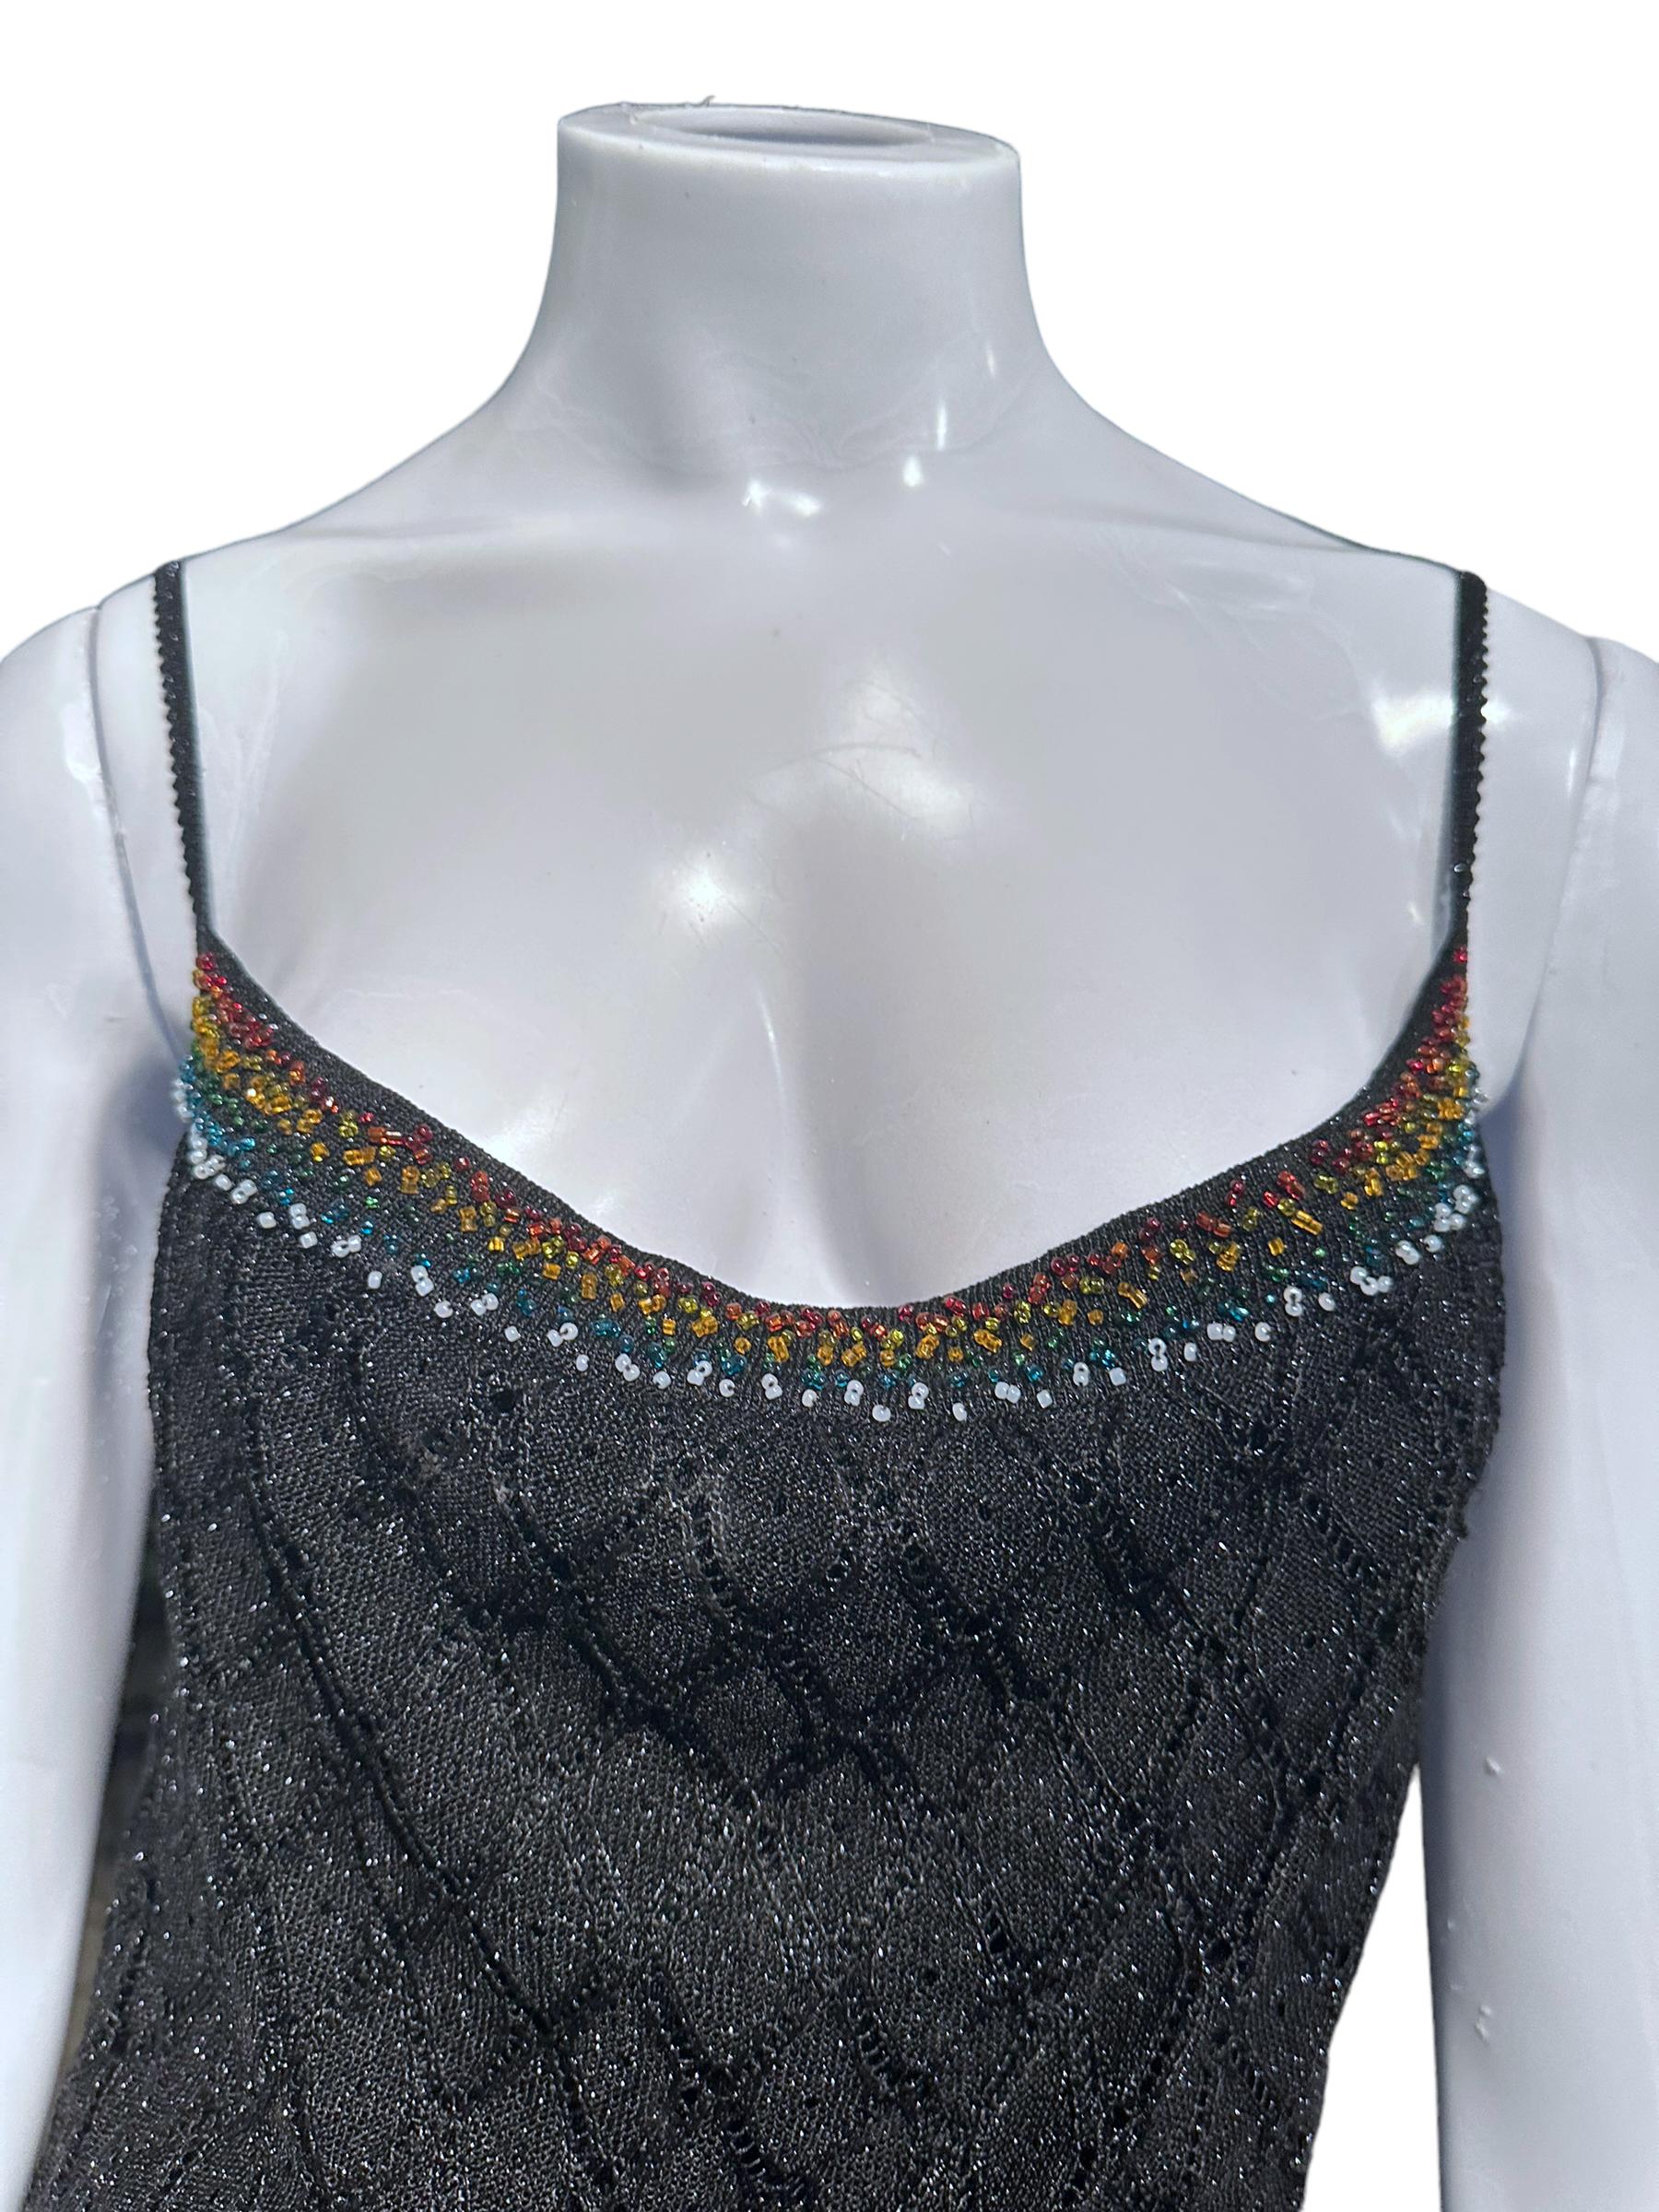 Christian Dior By John Galliano Fw 2001 Beaded Neckline Knitted Short Slip Dress In Excellent Condition For Sale In São Paulo, SP